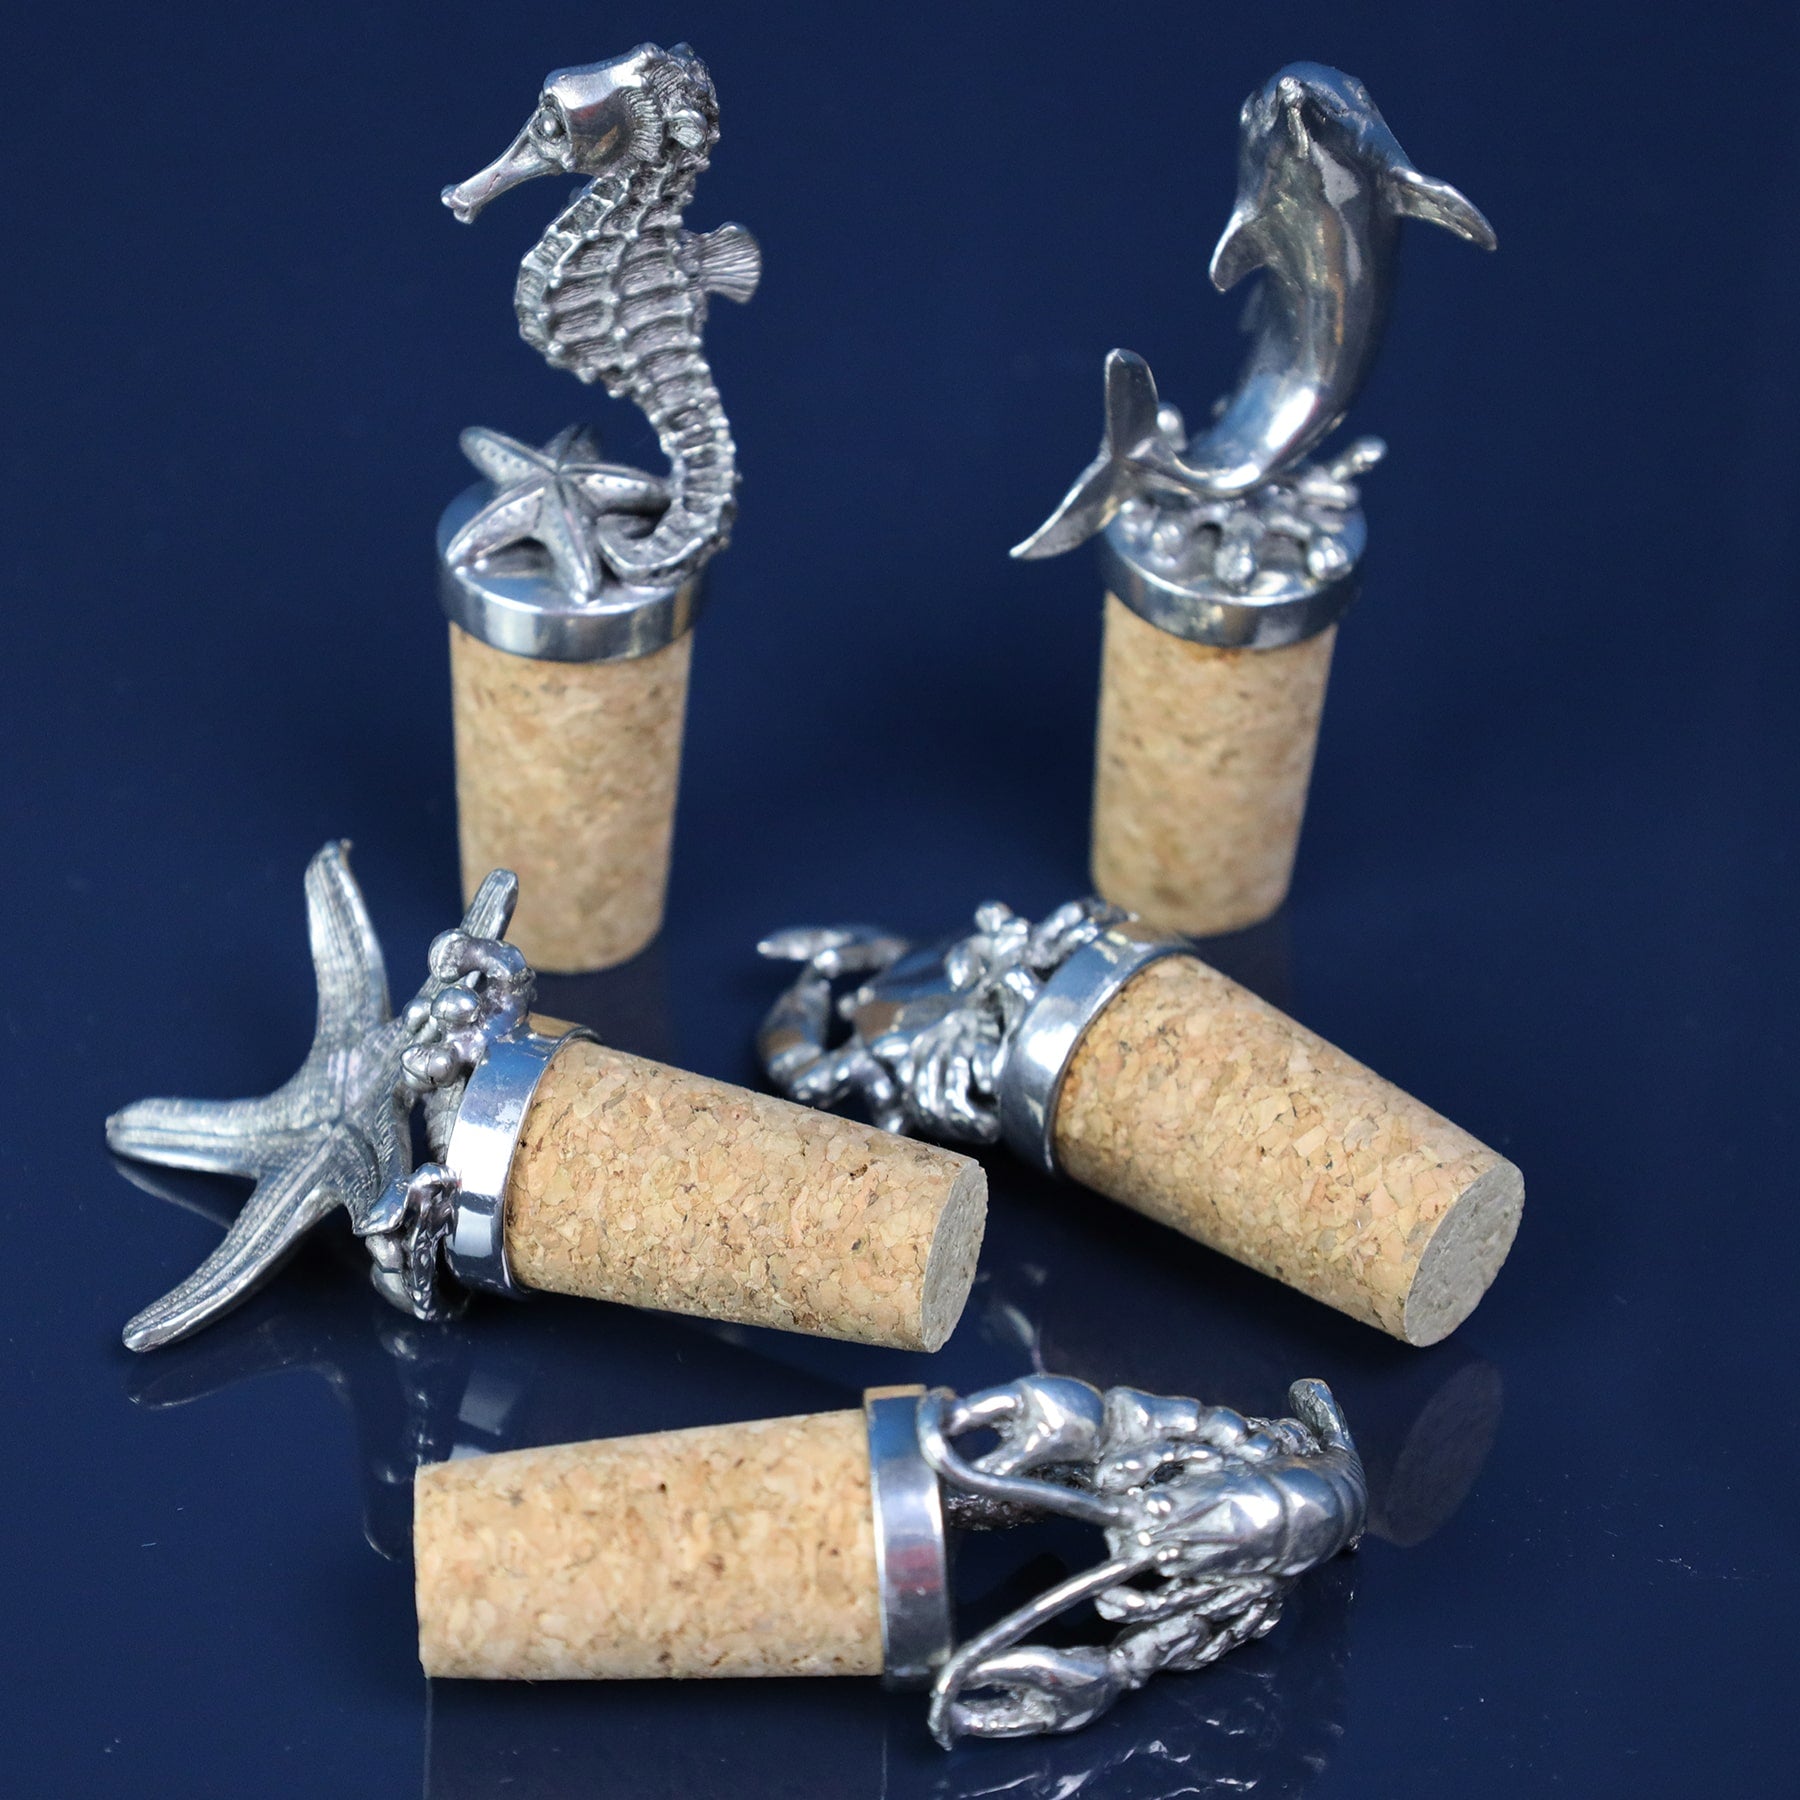 Seahorse,Starfish,Crab,Lobster and Dolphin Cork Stopper all lined up on a table, some lying on their side